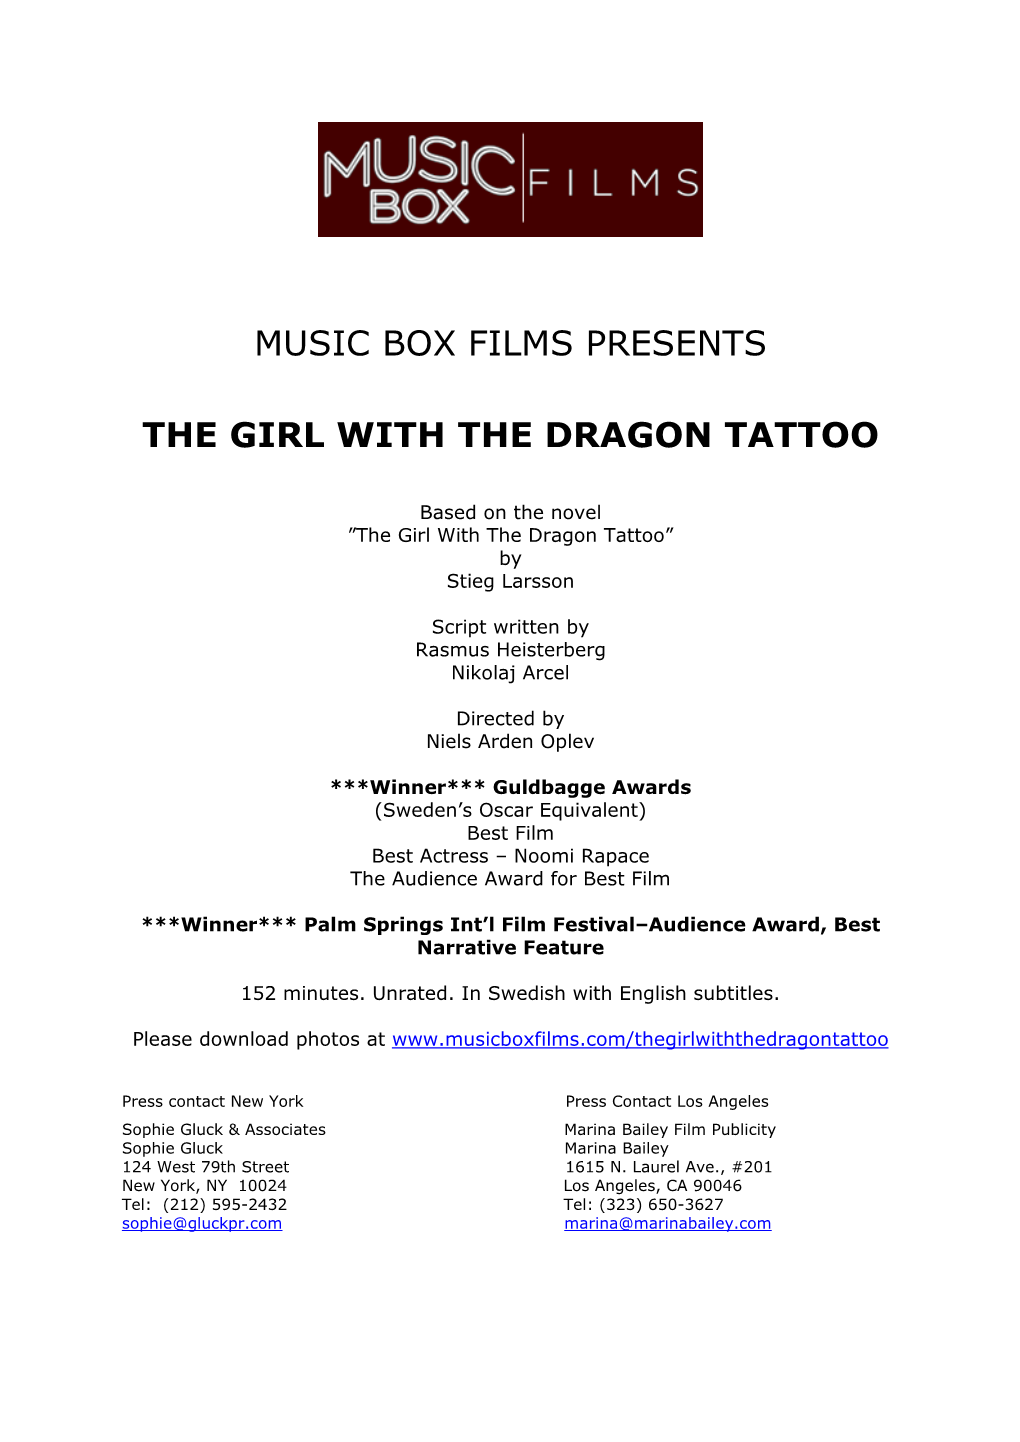 Music Box Films Presents the Girl with the Dragon Tattoo